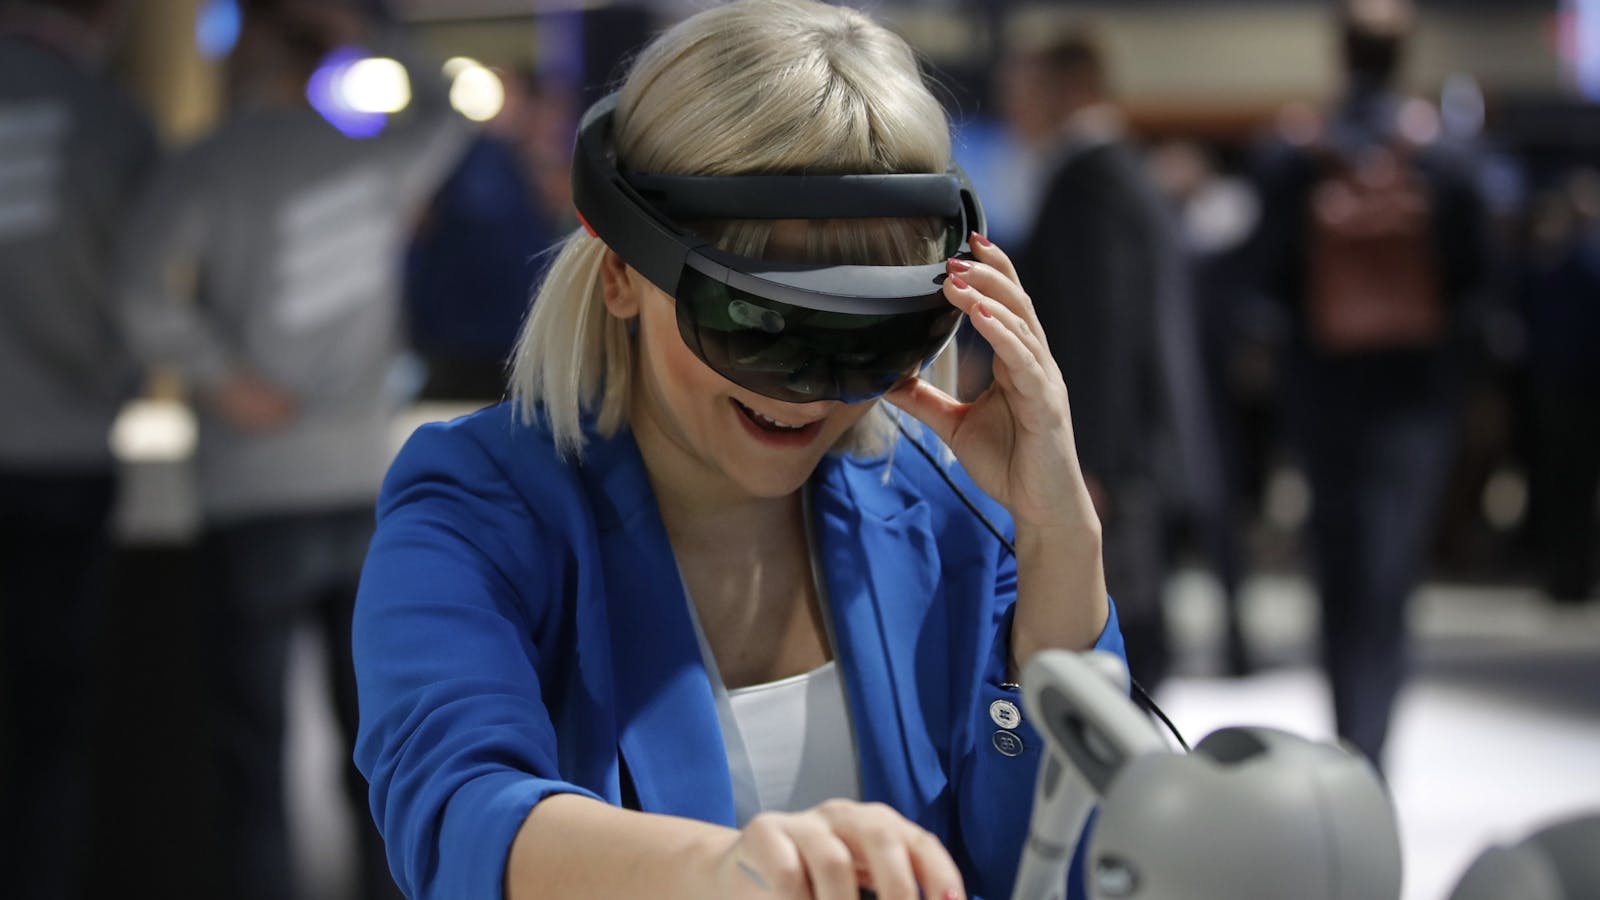 An attendee at Mobile World Congress in Barcelona this year wearing a Microsoft Hololens AR headset. Photo by Bloomberg